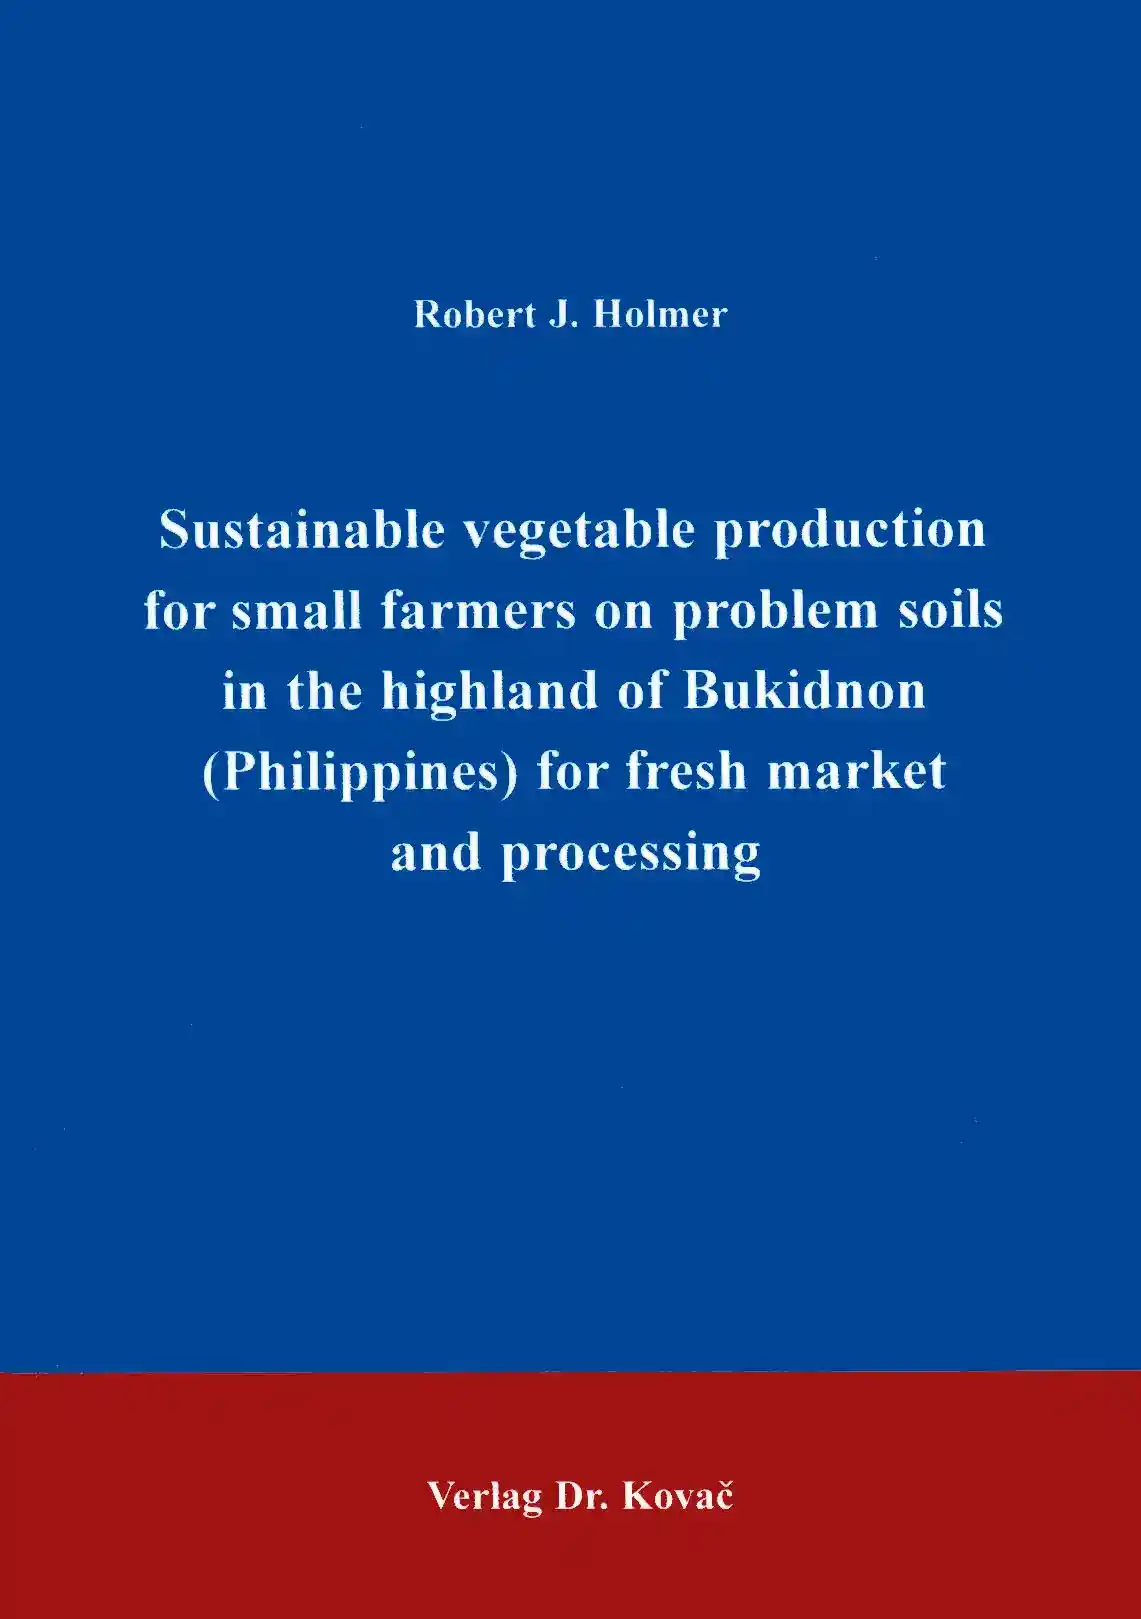 Cover: Sustainable vegetable production for small farmers on problem soils in the highland of Bukidnon (Philippines) for fresh market and processing